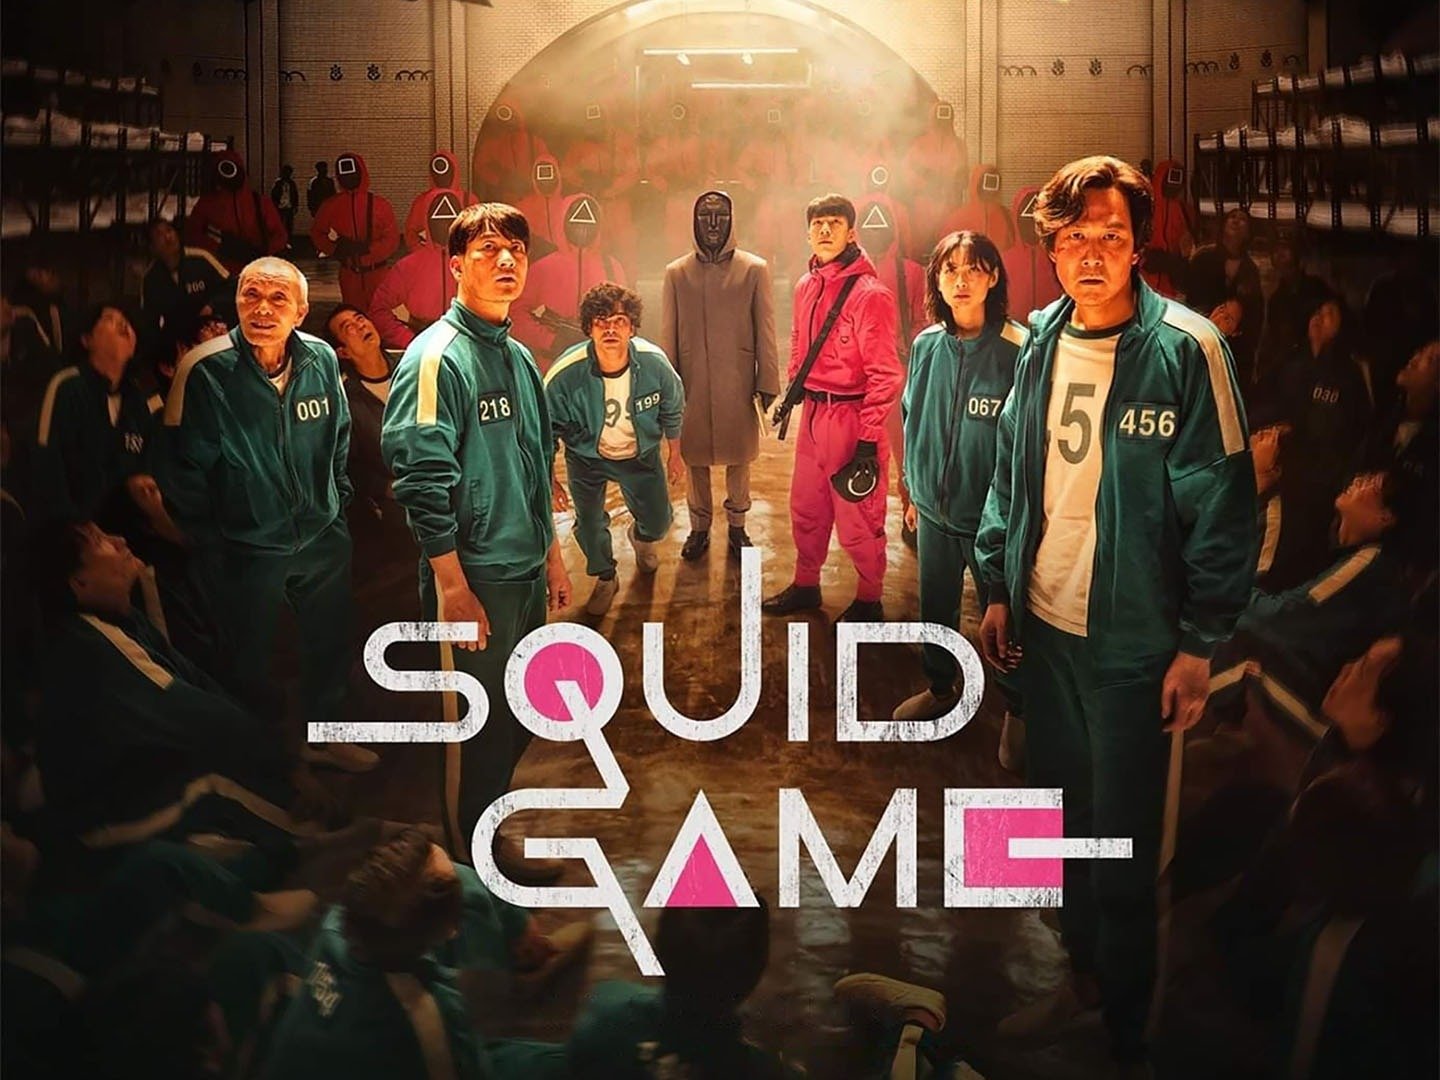 Get ready for more games: 'Squid Game' readies for Season 2